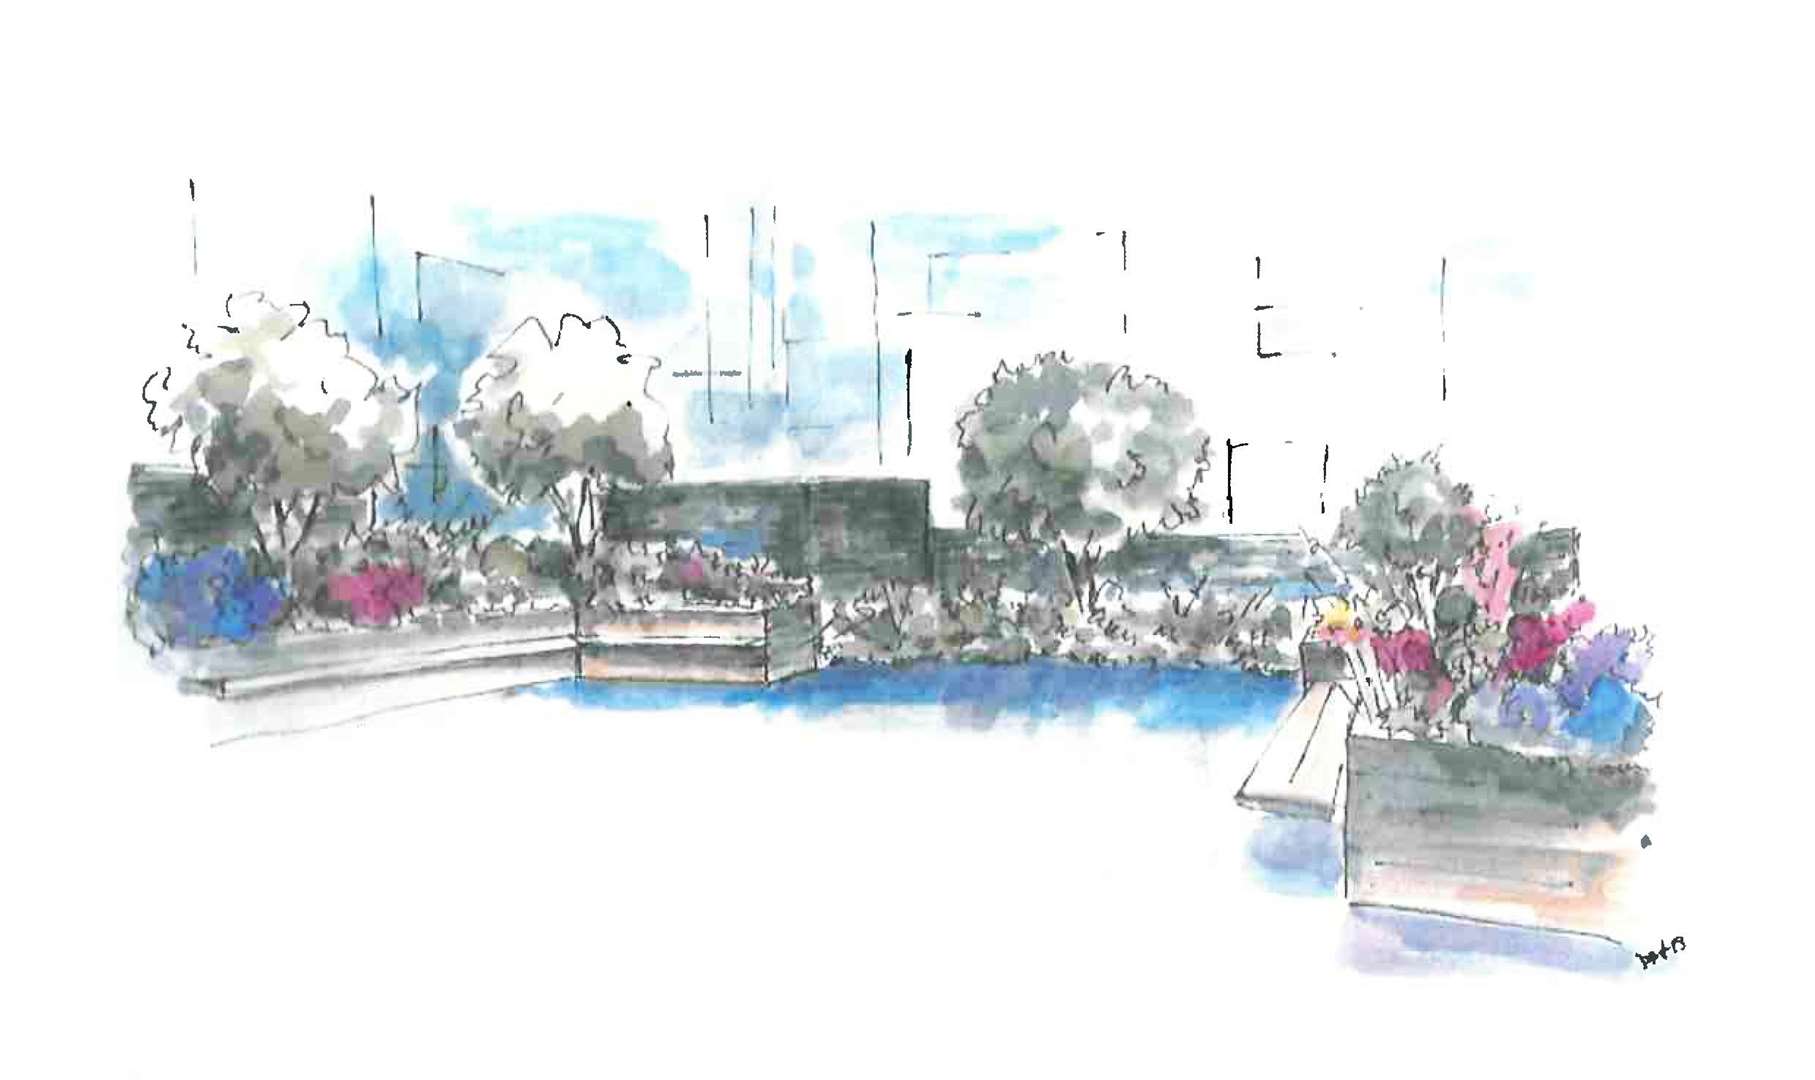 An artist's impression of what the finished sensory garden will look like